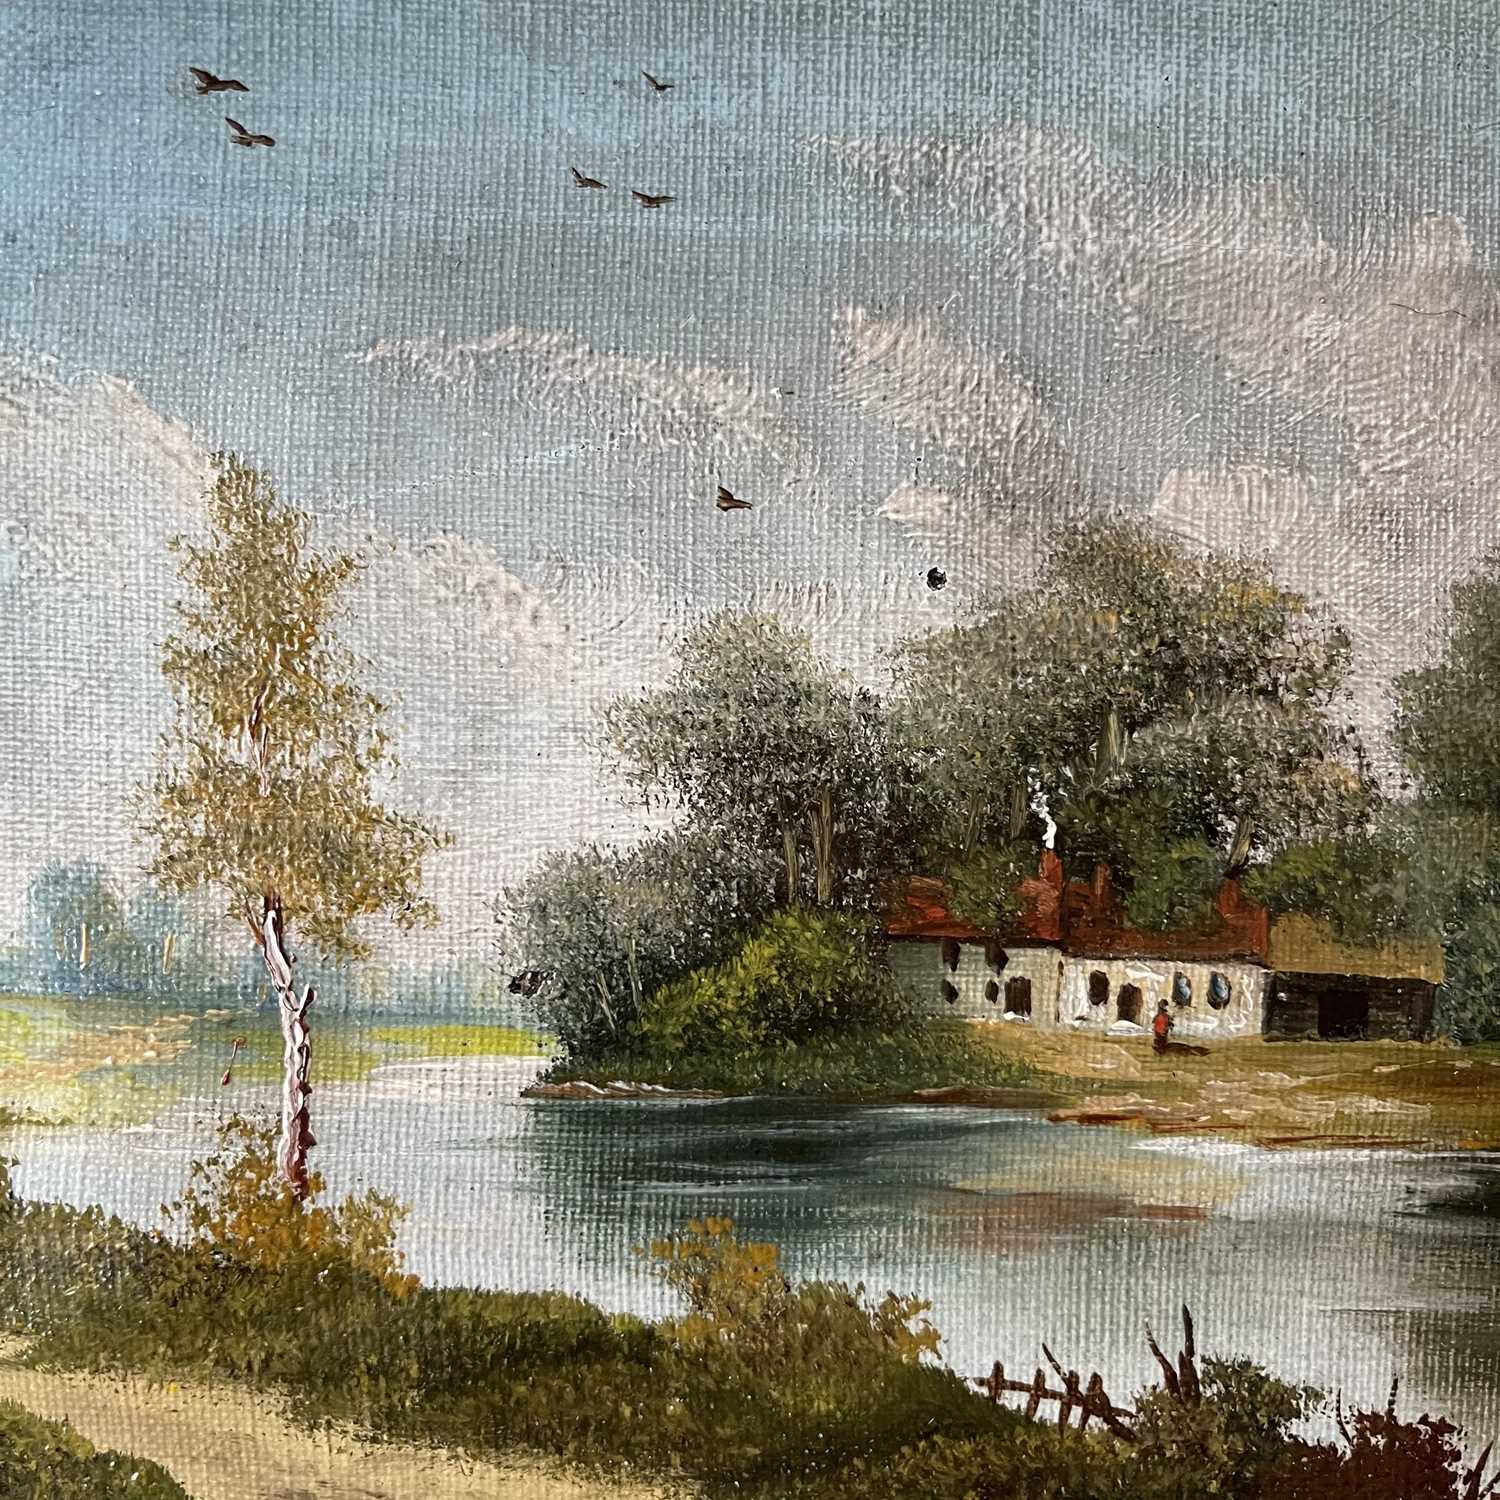 20th Century School Riverside CottagesOil on canvasIndistinctly signed 18.5 x 23.5cm - Image 3 of 6